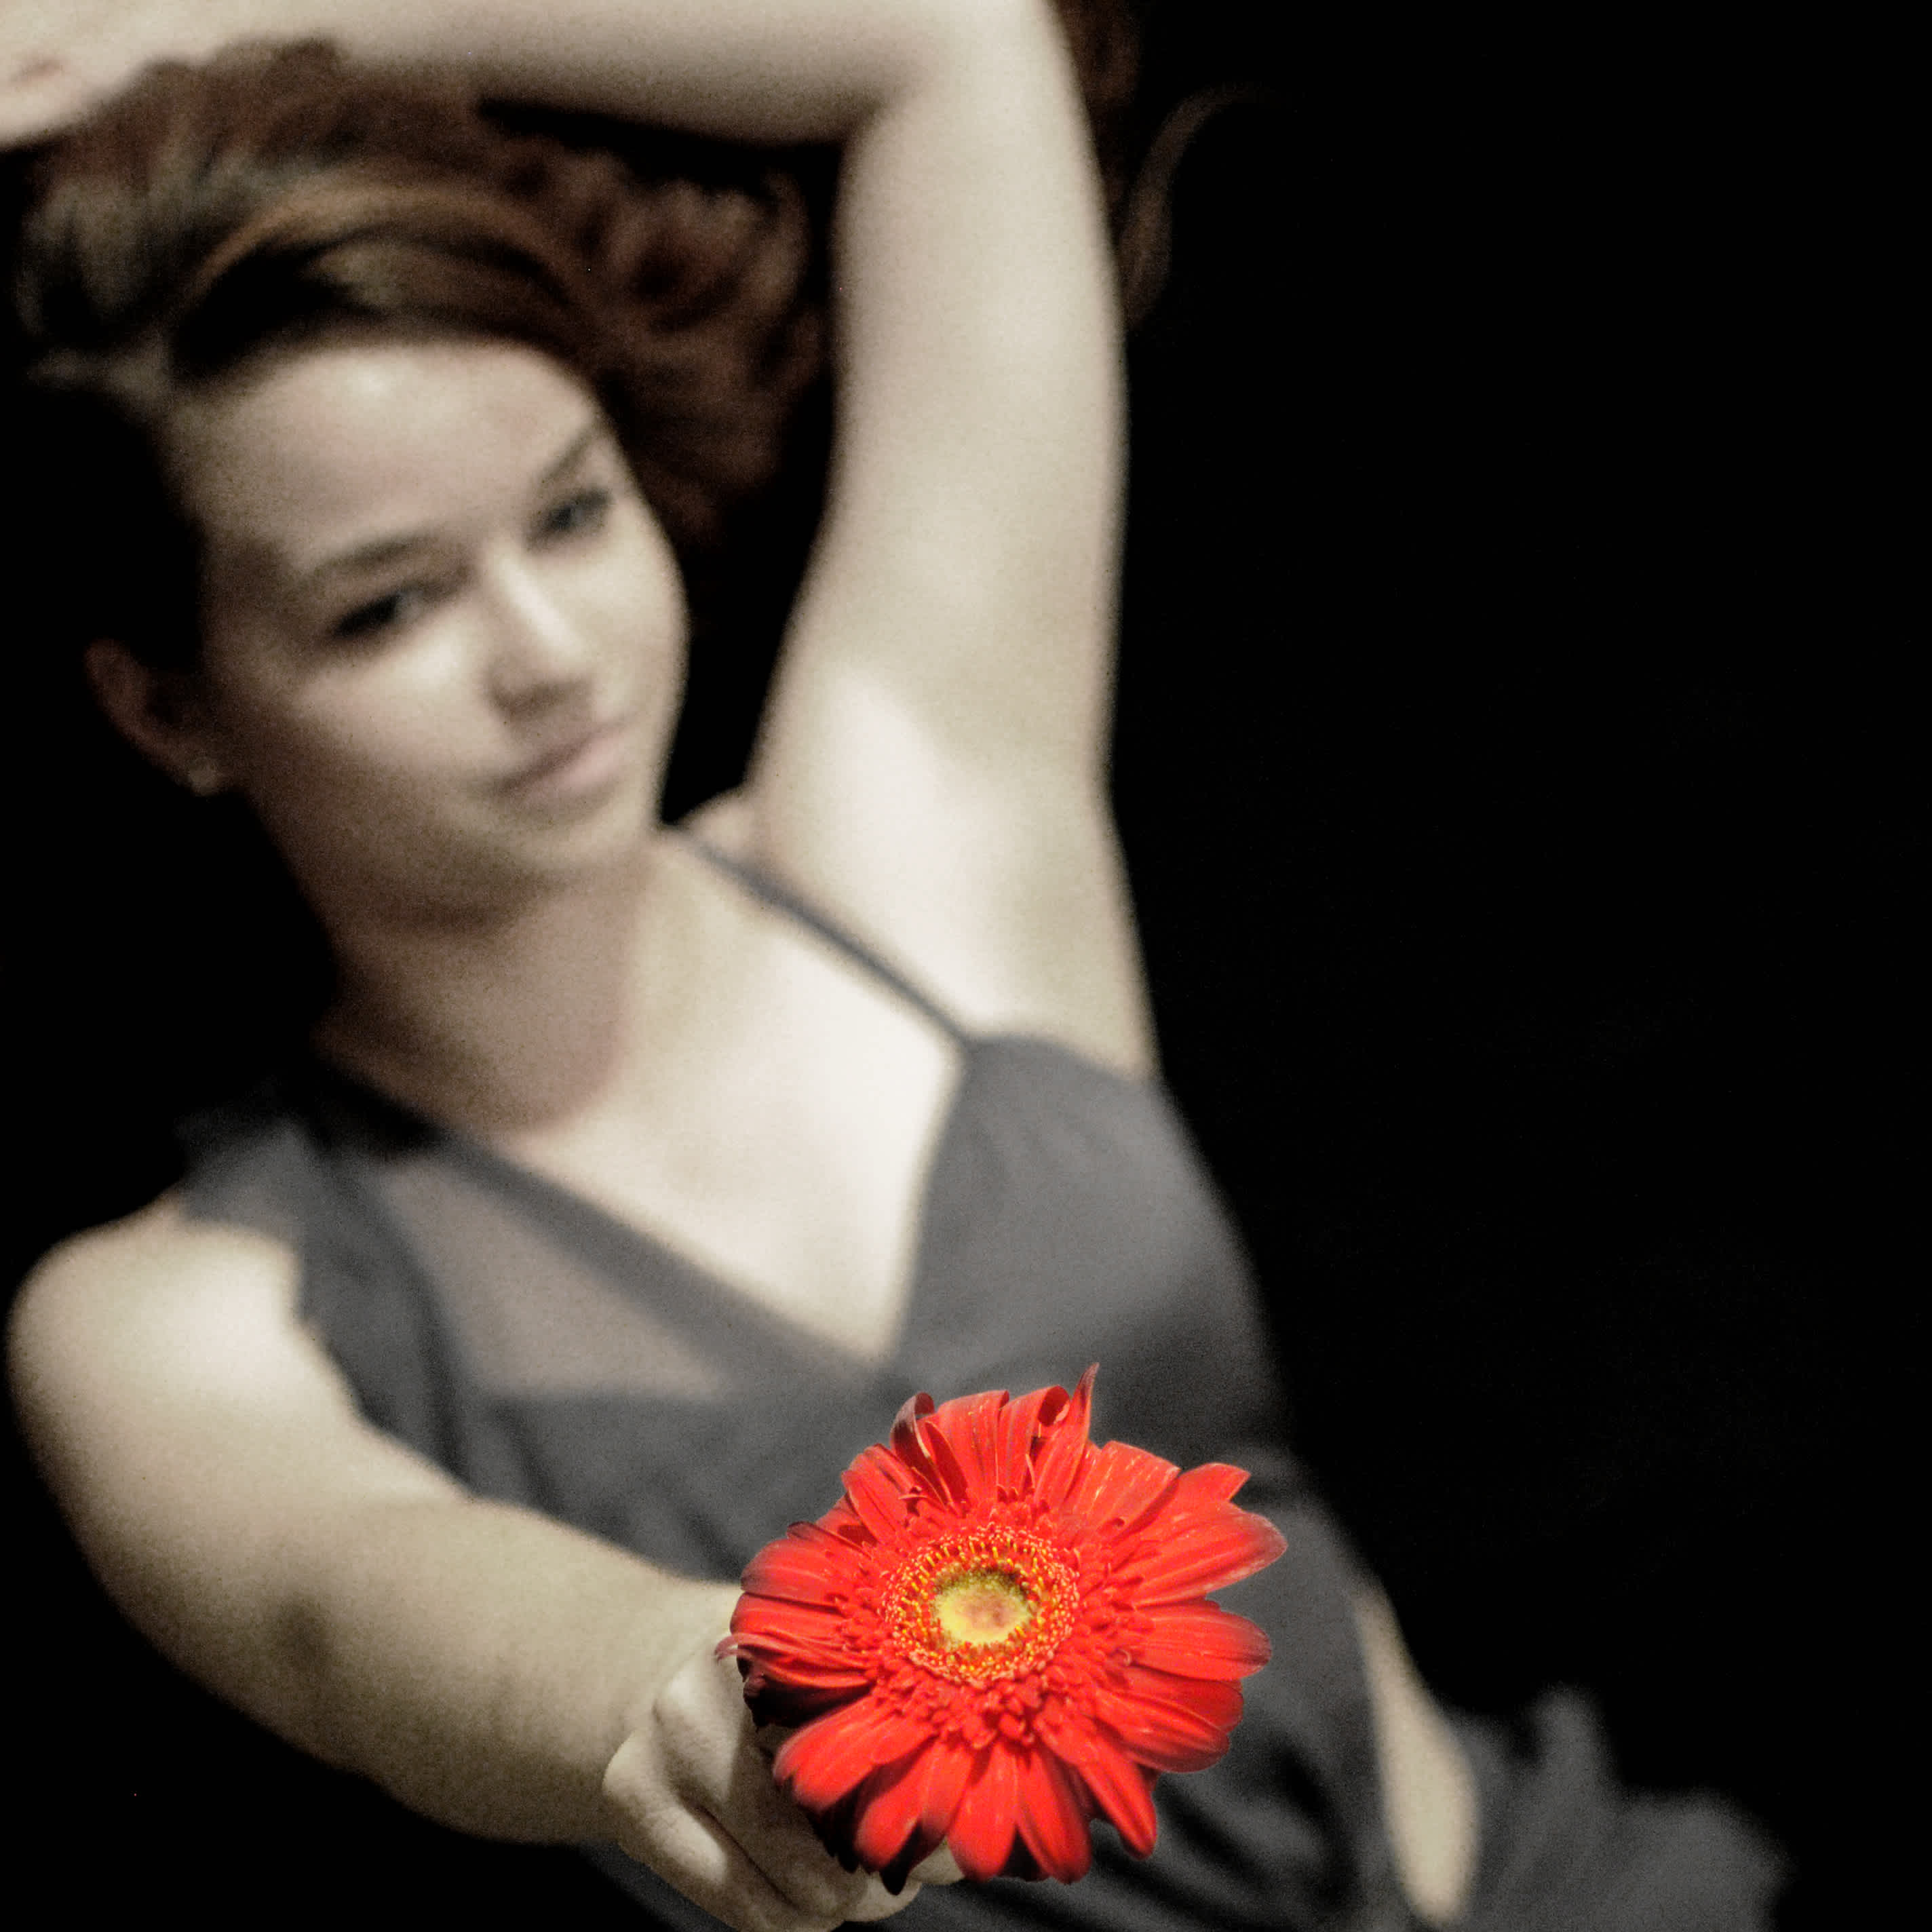 Girl laying down holding up a flower.